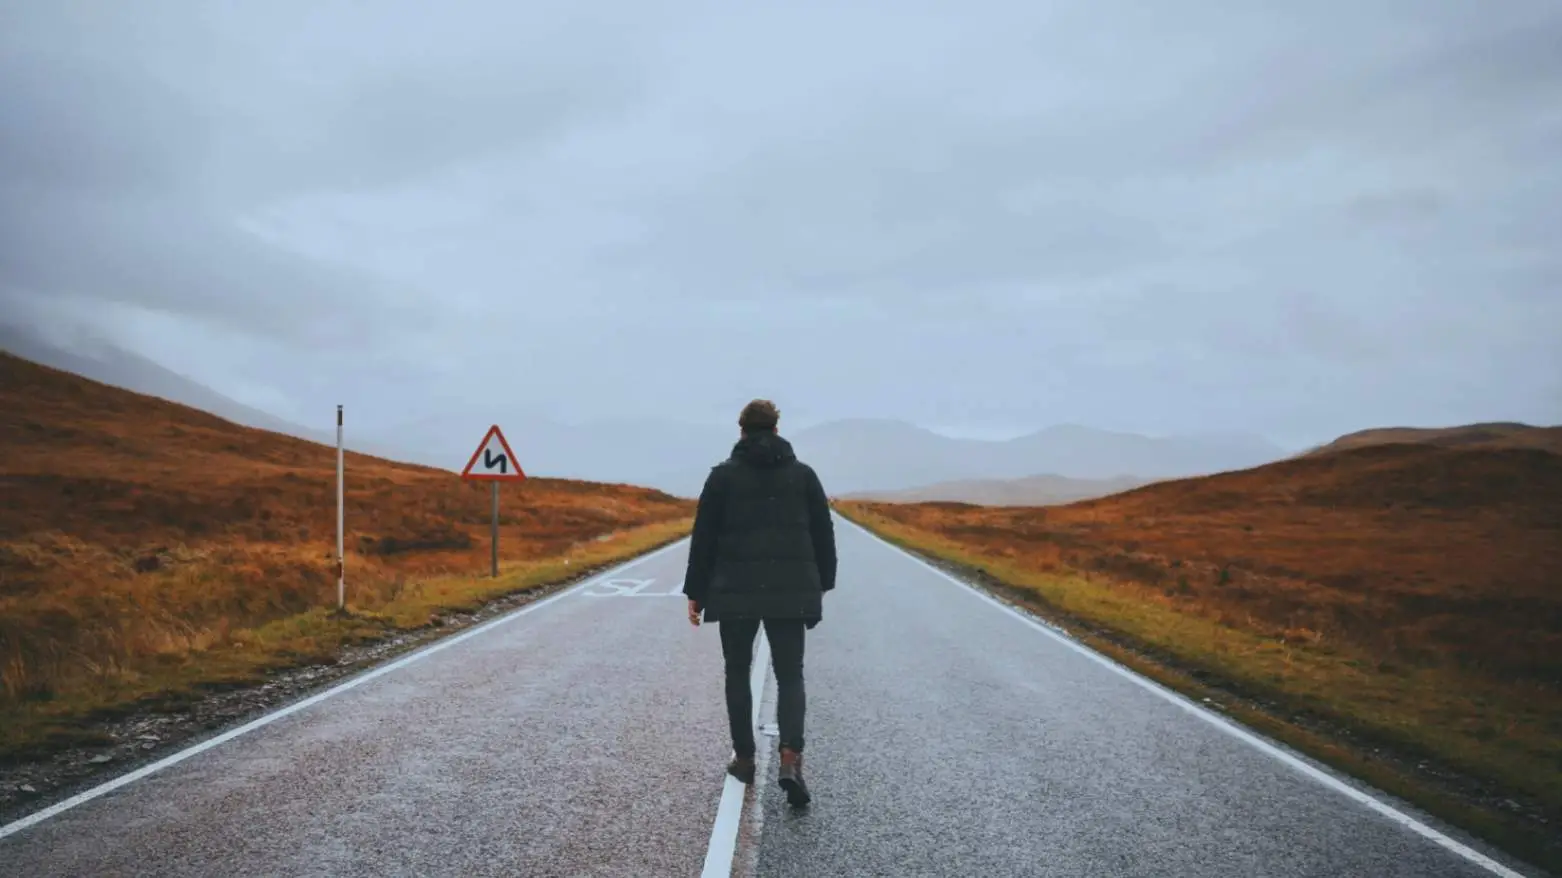 "Lone man walking on a deserted road in a scenic mountainous area, symbolizing challenge, journey, and solitude."